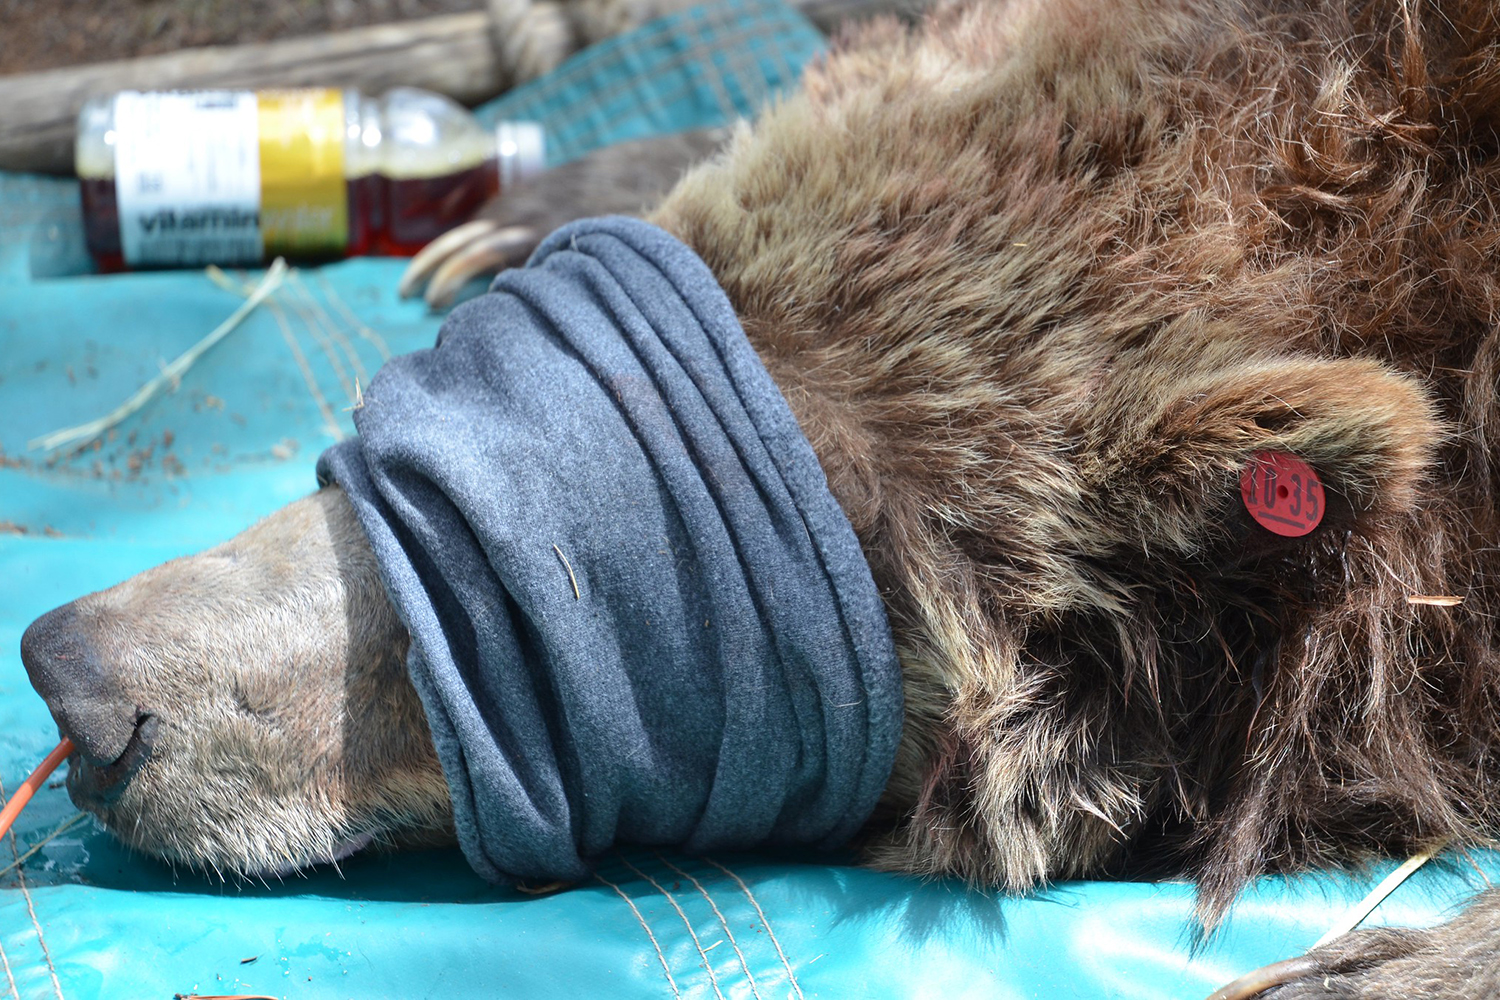 sedated bear with eye covering and ear tag